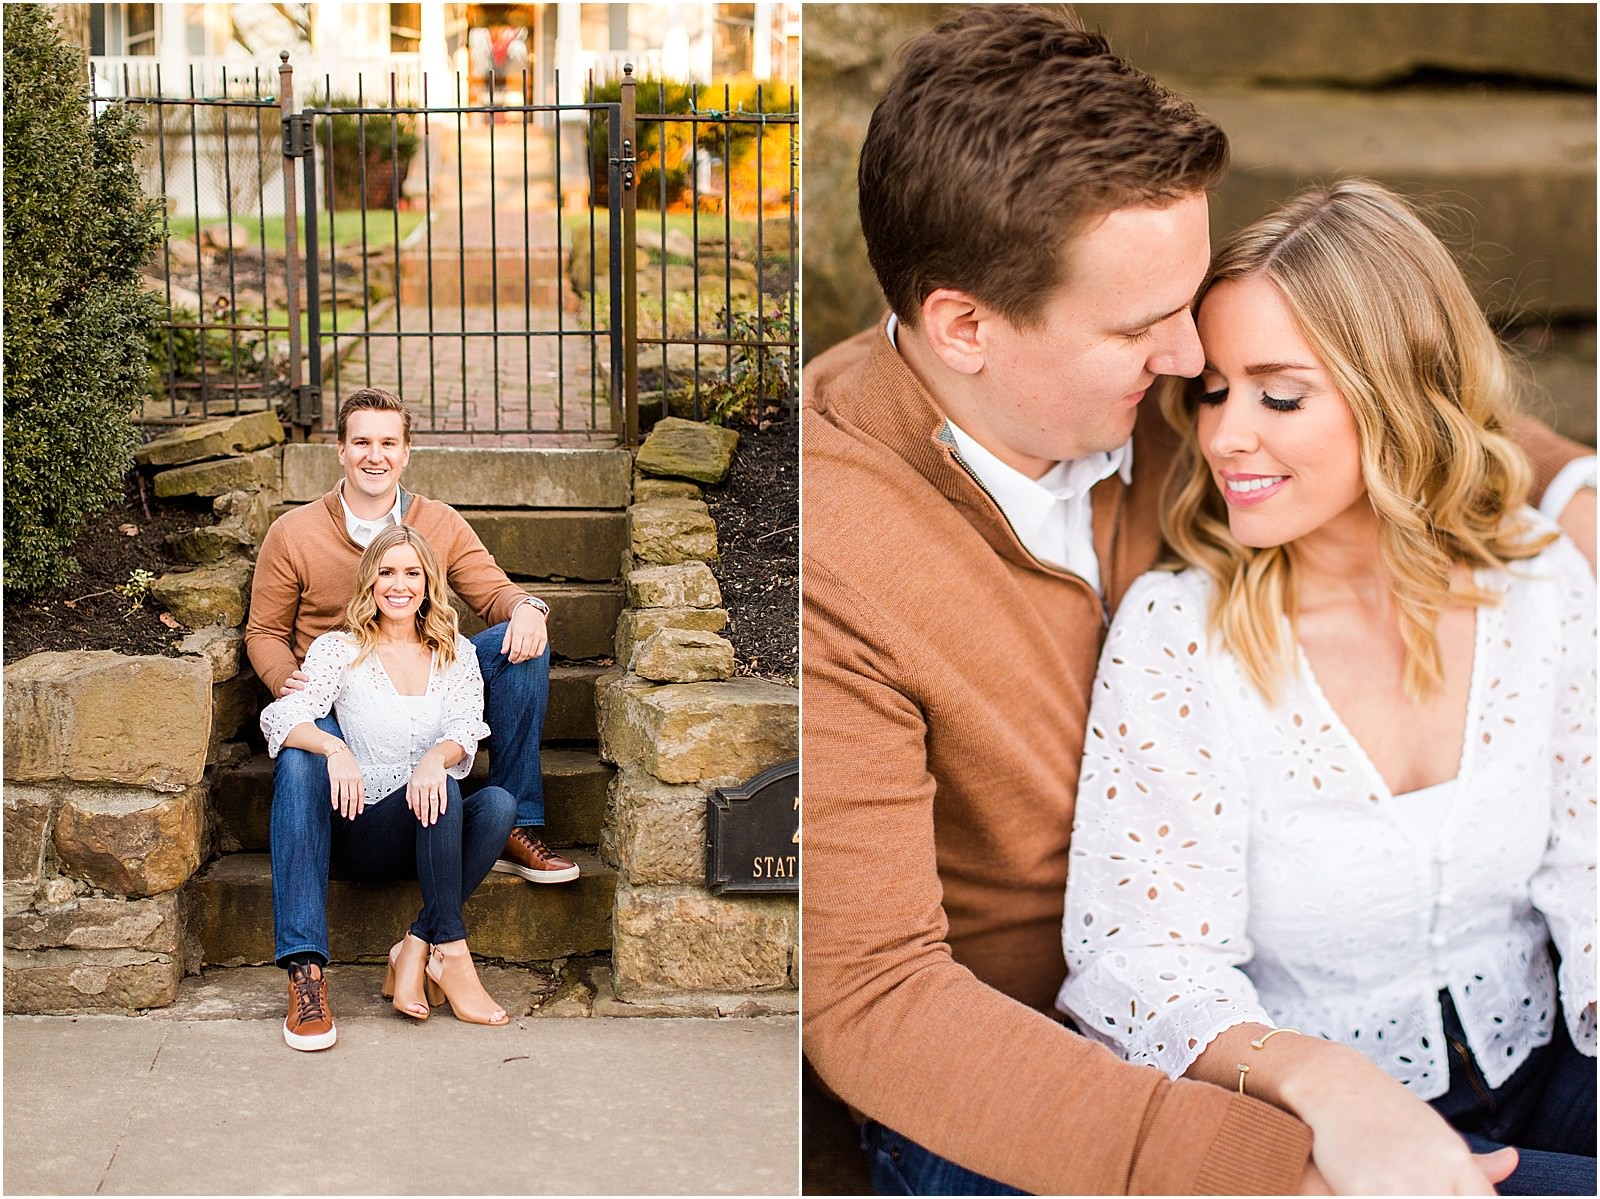 Madison and Christaan | A 20 West Engagement Session in Downto wn Newburgh | Bret and Brandie Photography041.jpg